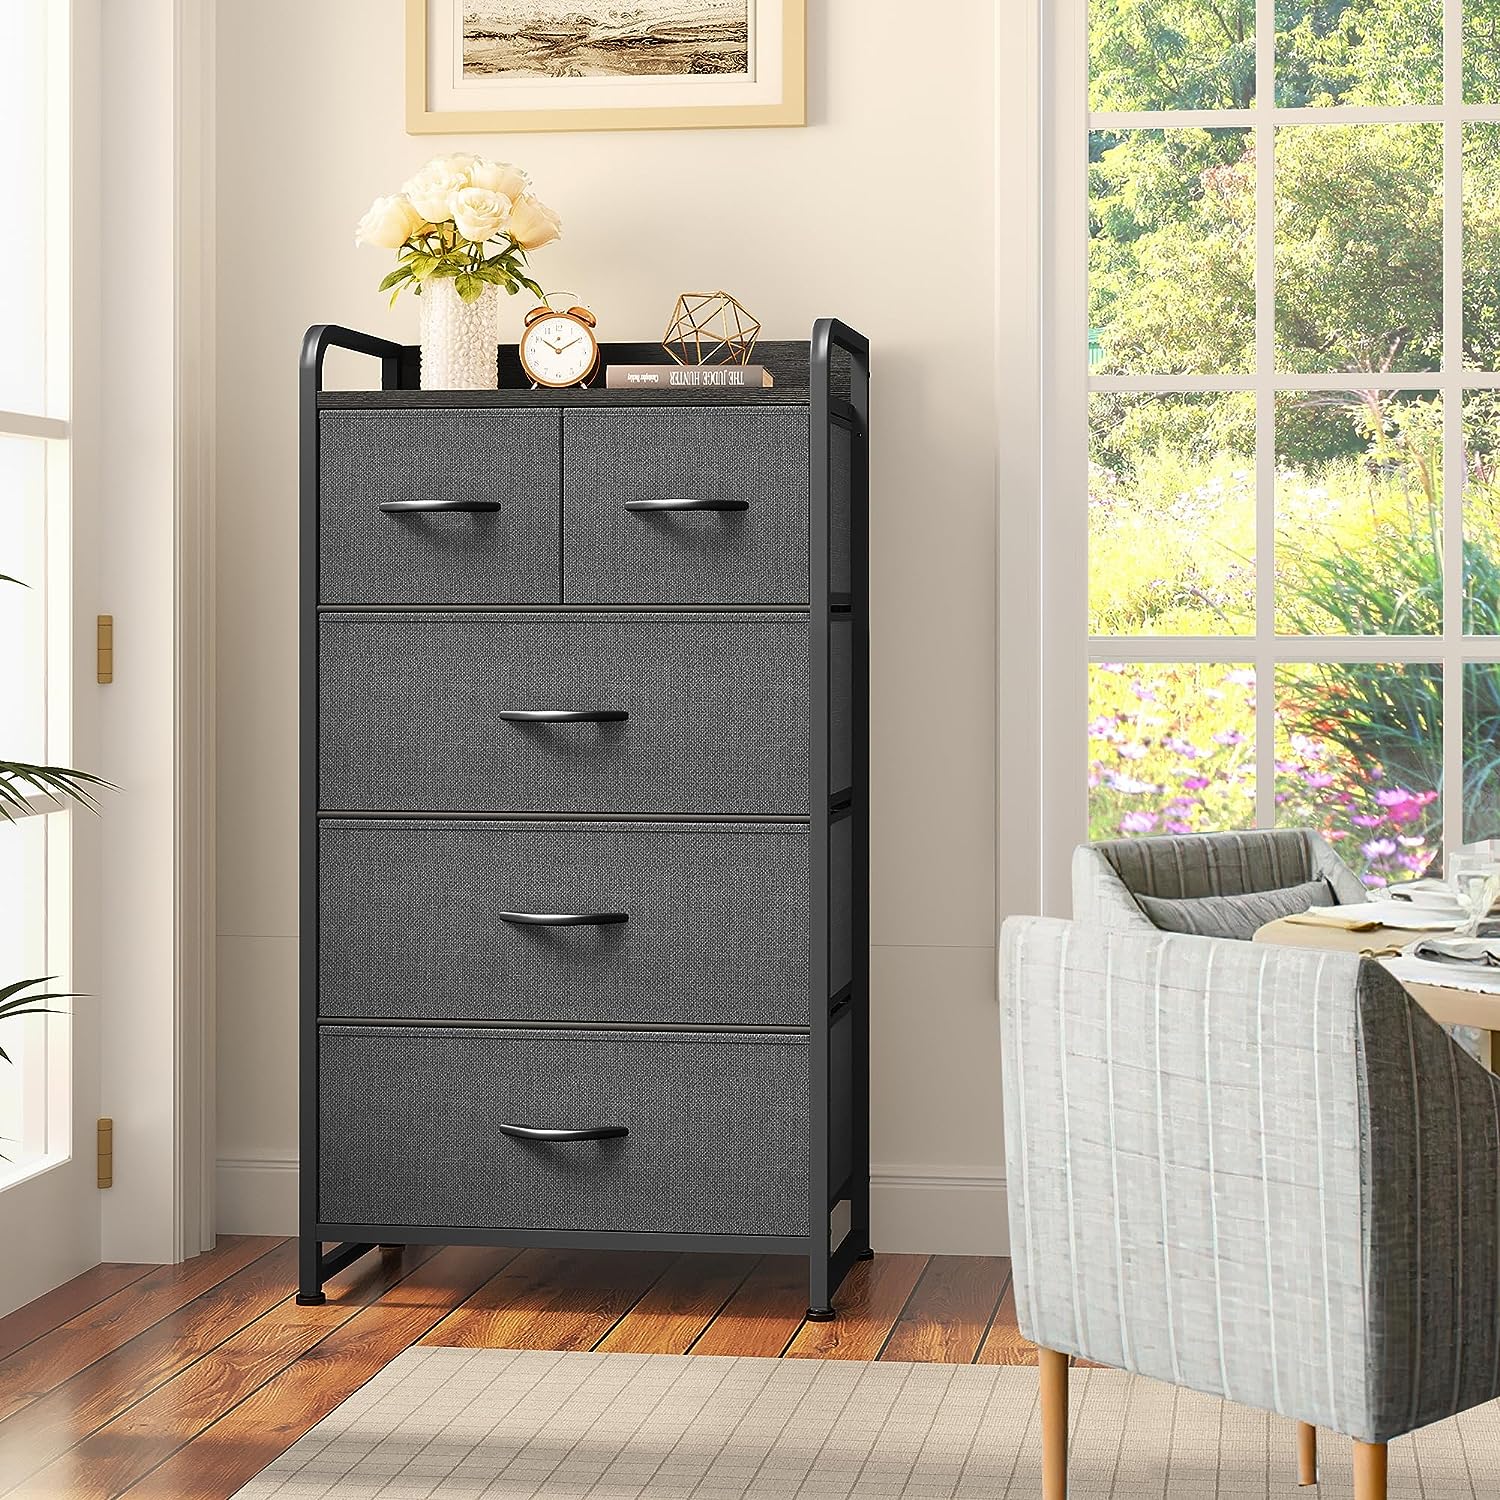 Cabinet organizer with 5 fabric drawers and a wooden top, with a